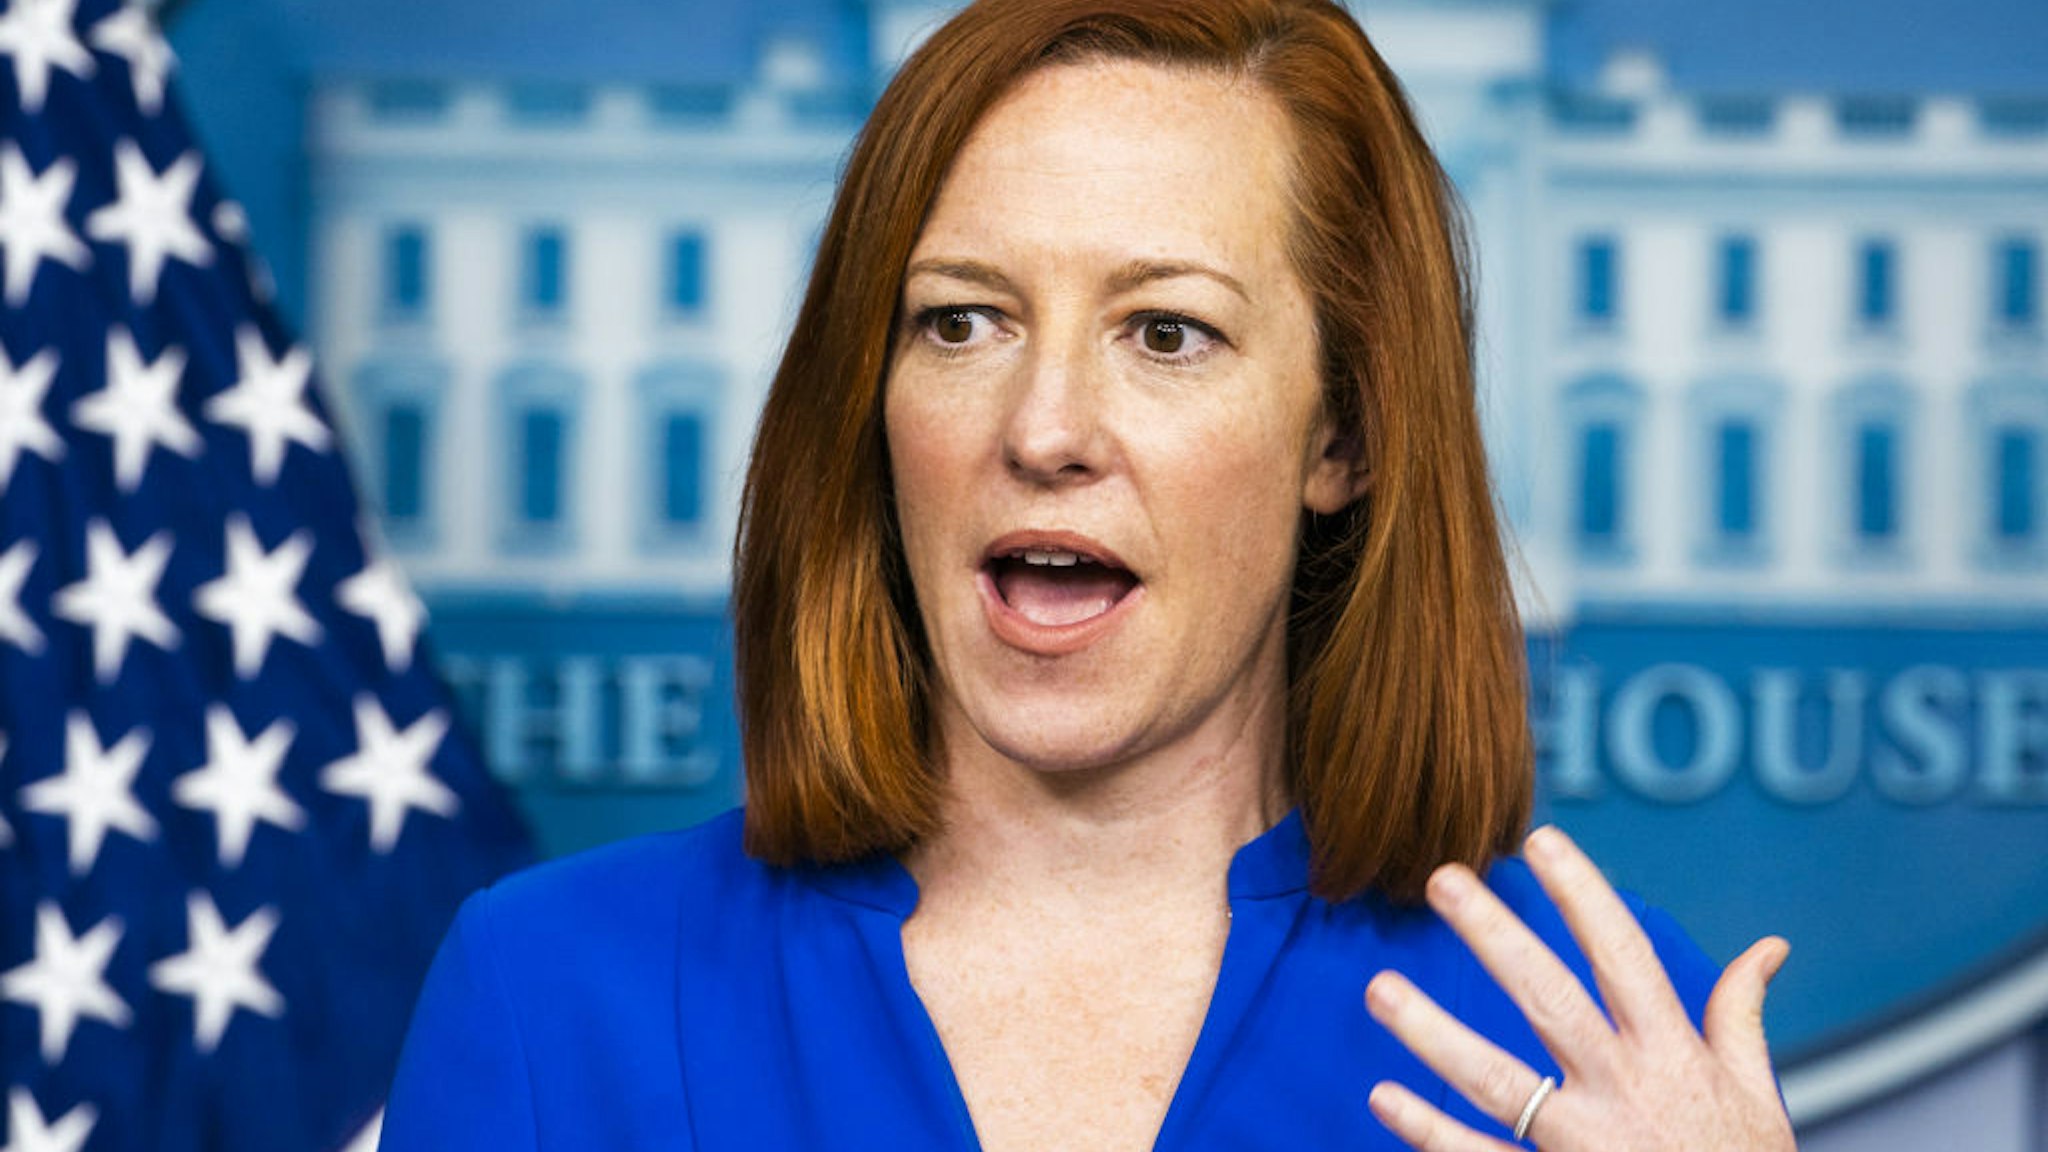 Jen Psaki, White House press secretary, speaks during a news conference in the James S. Brady Press Briefing Room at the White House in Washington, D.C., U.S., on Friday, March 12, 2021.